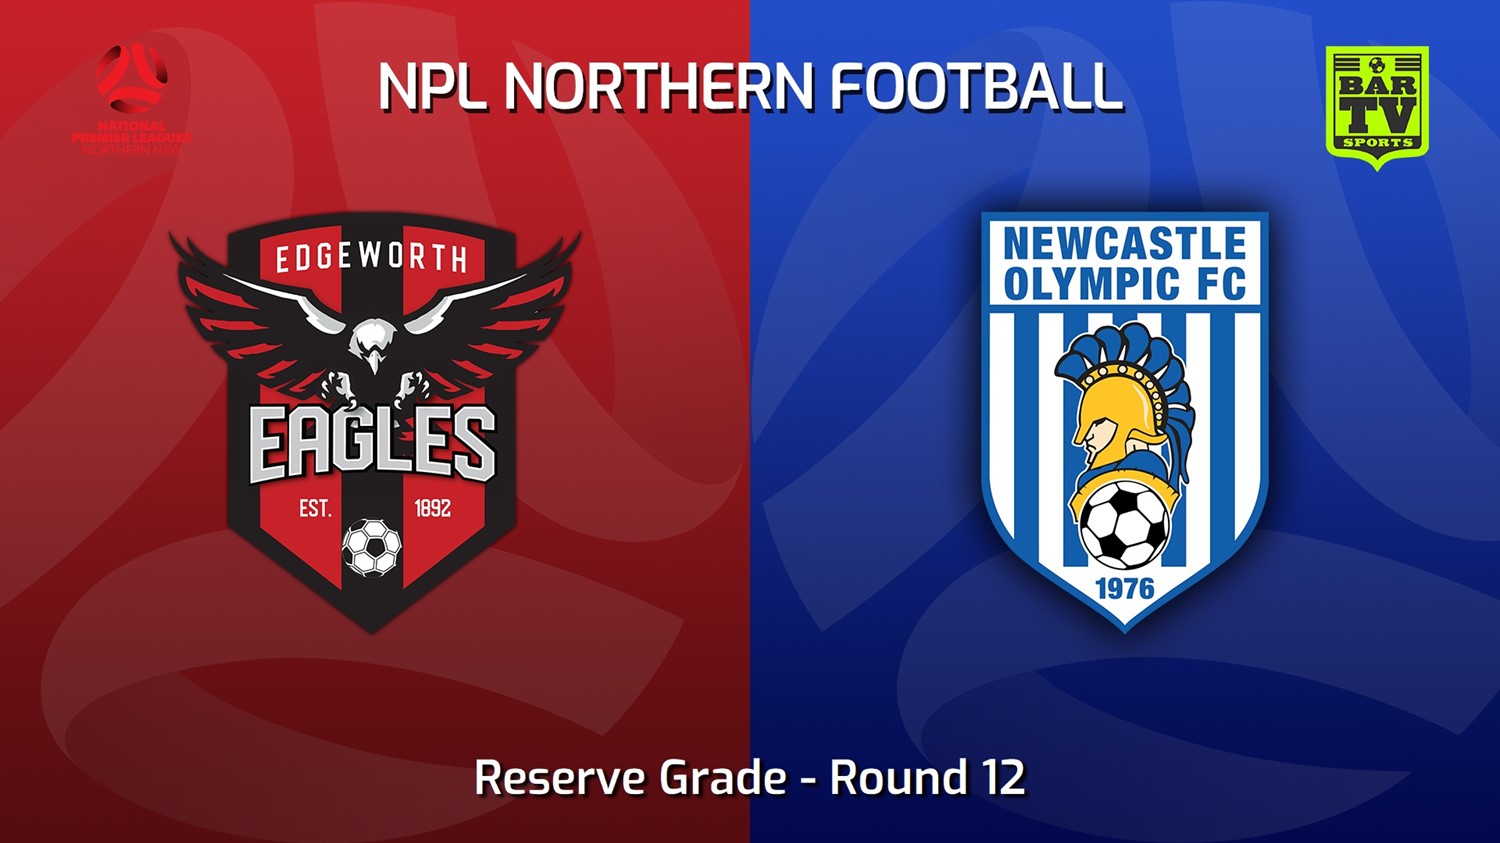 230520-NNSW NPLM Res Round 12 - Edgeworth Eagles Res v Newcastle Olympic Res Minigame Slate Image